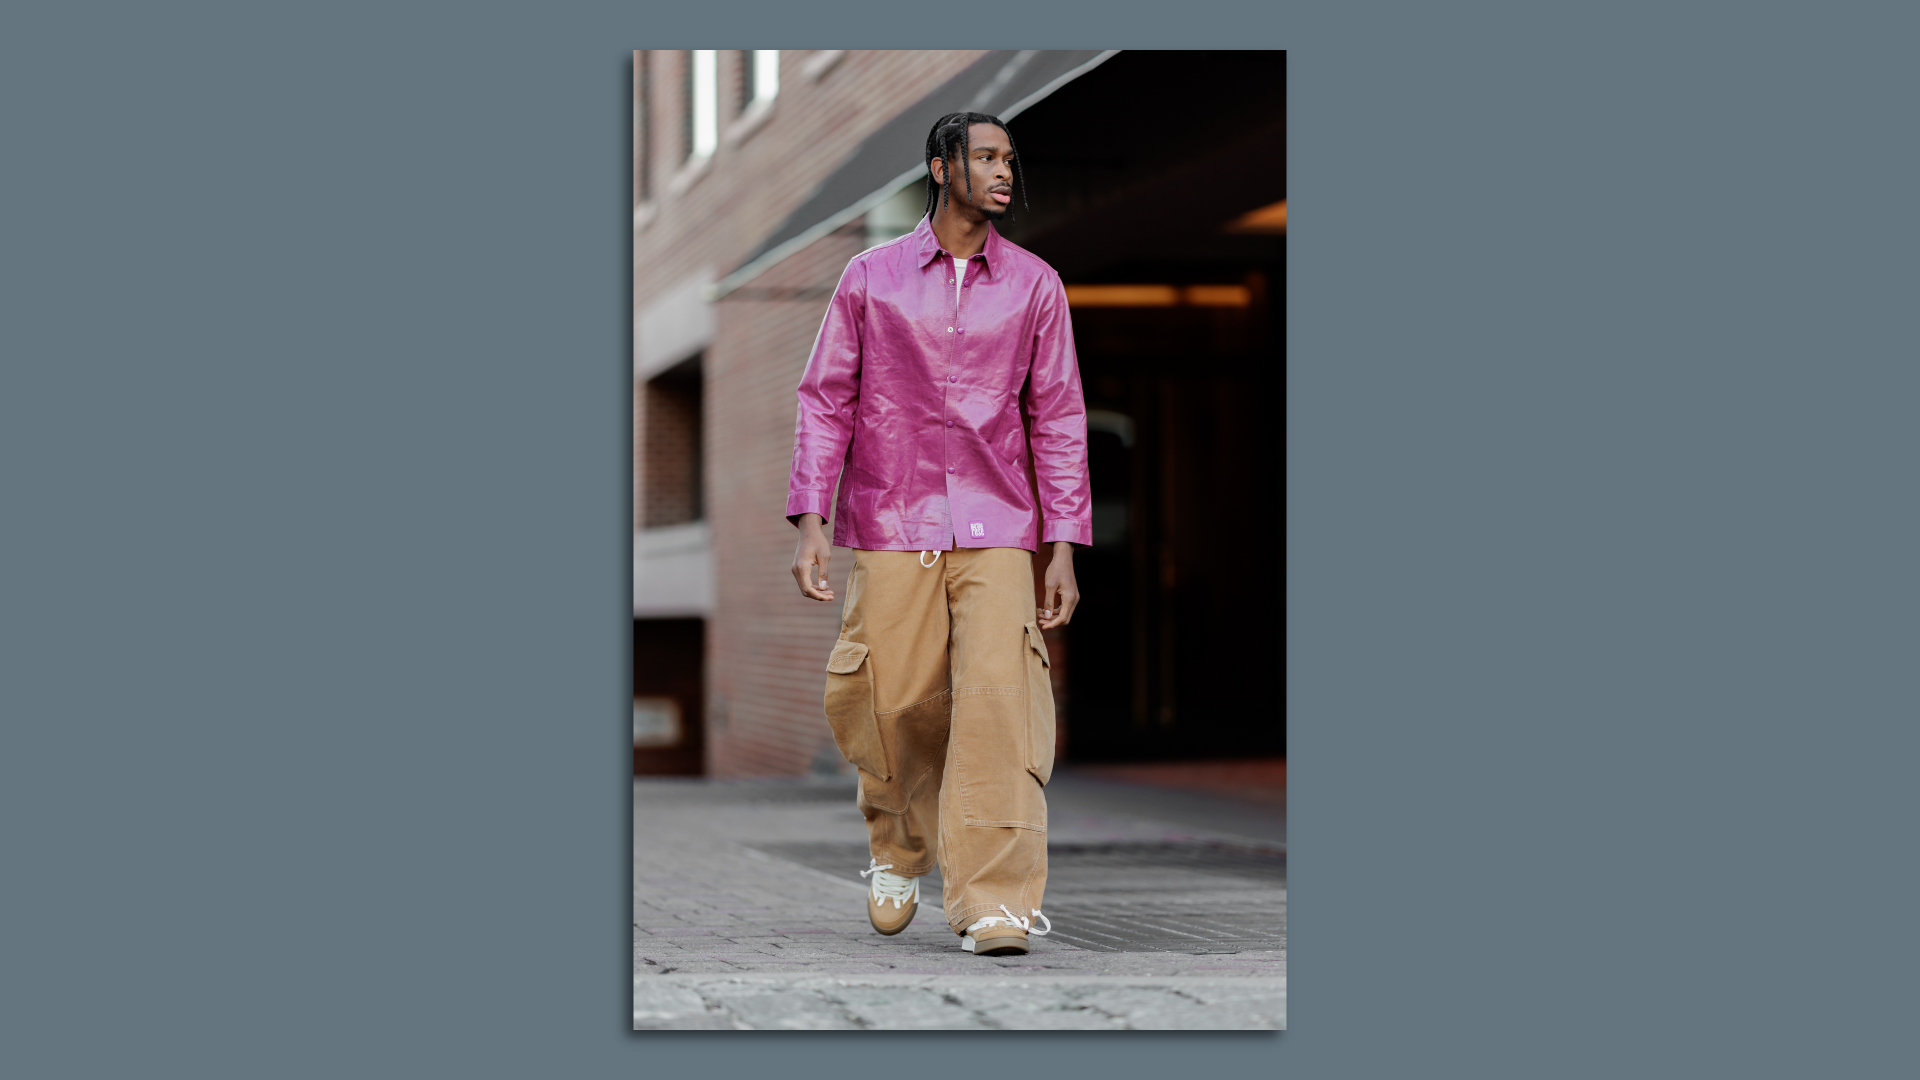 A man in a pink shirt and cargo pants walks the sidewalk